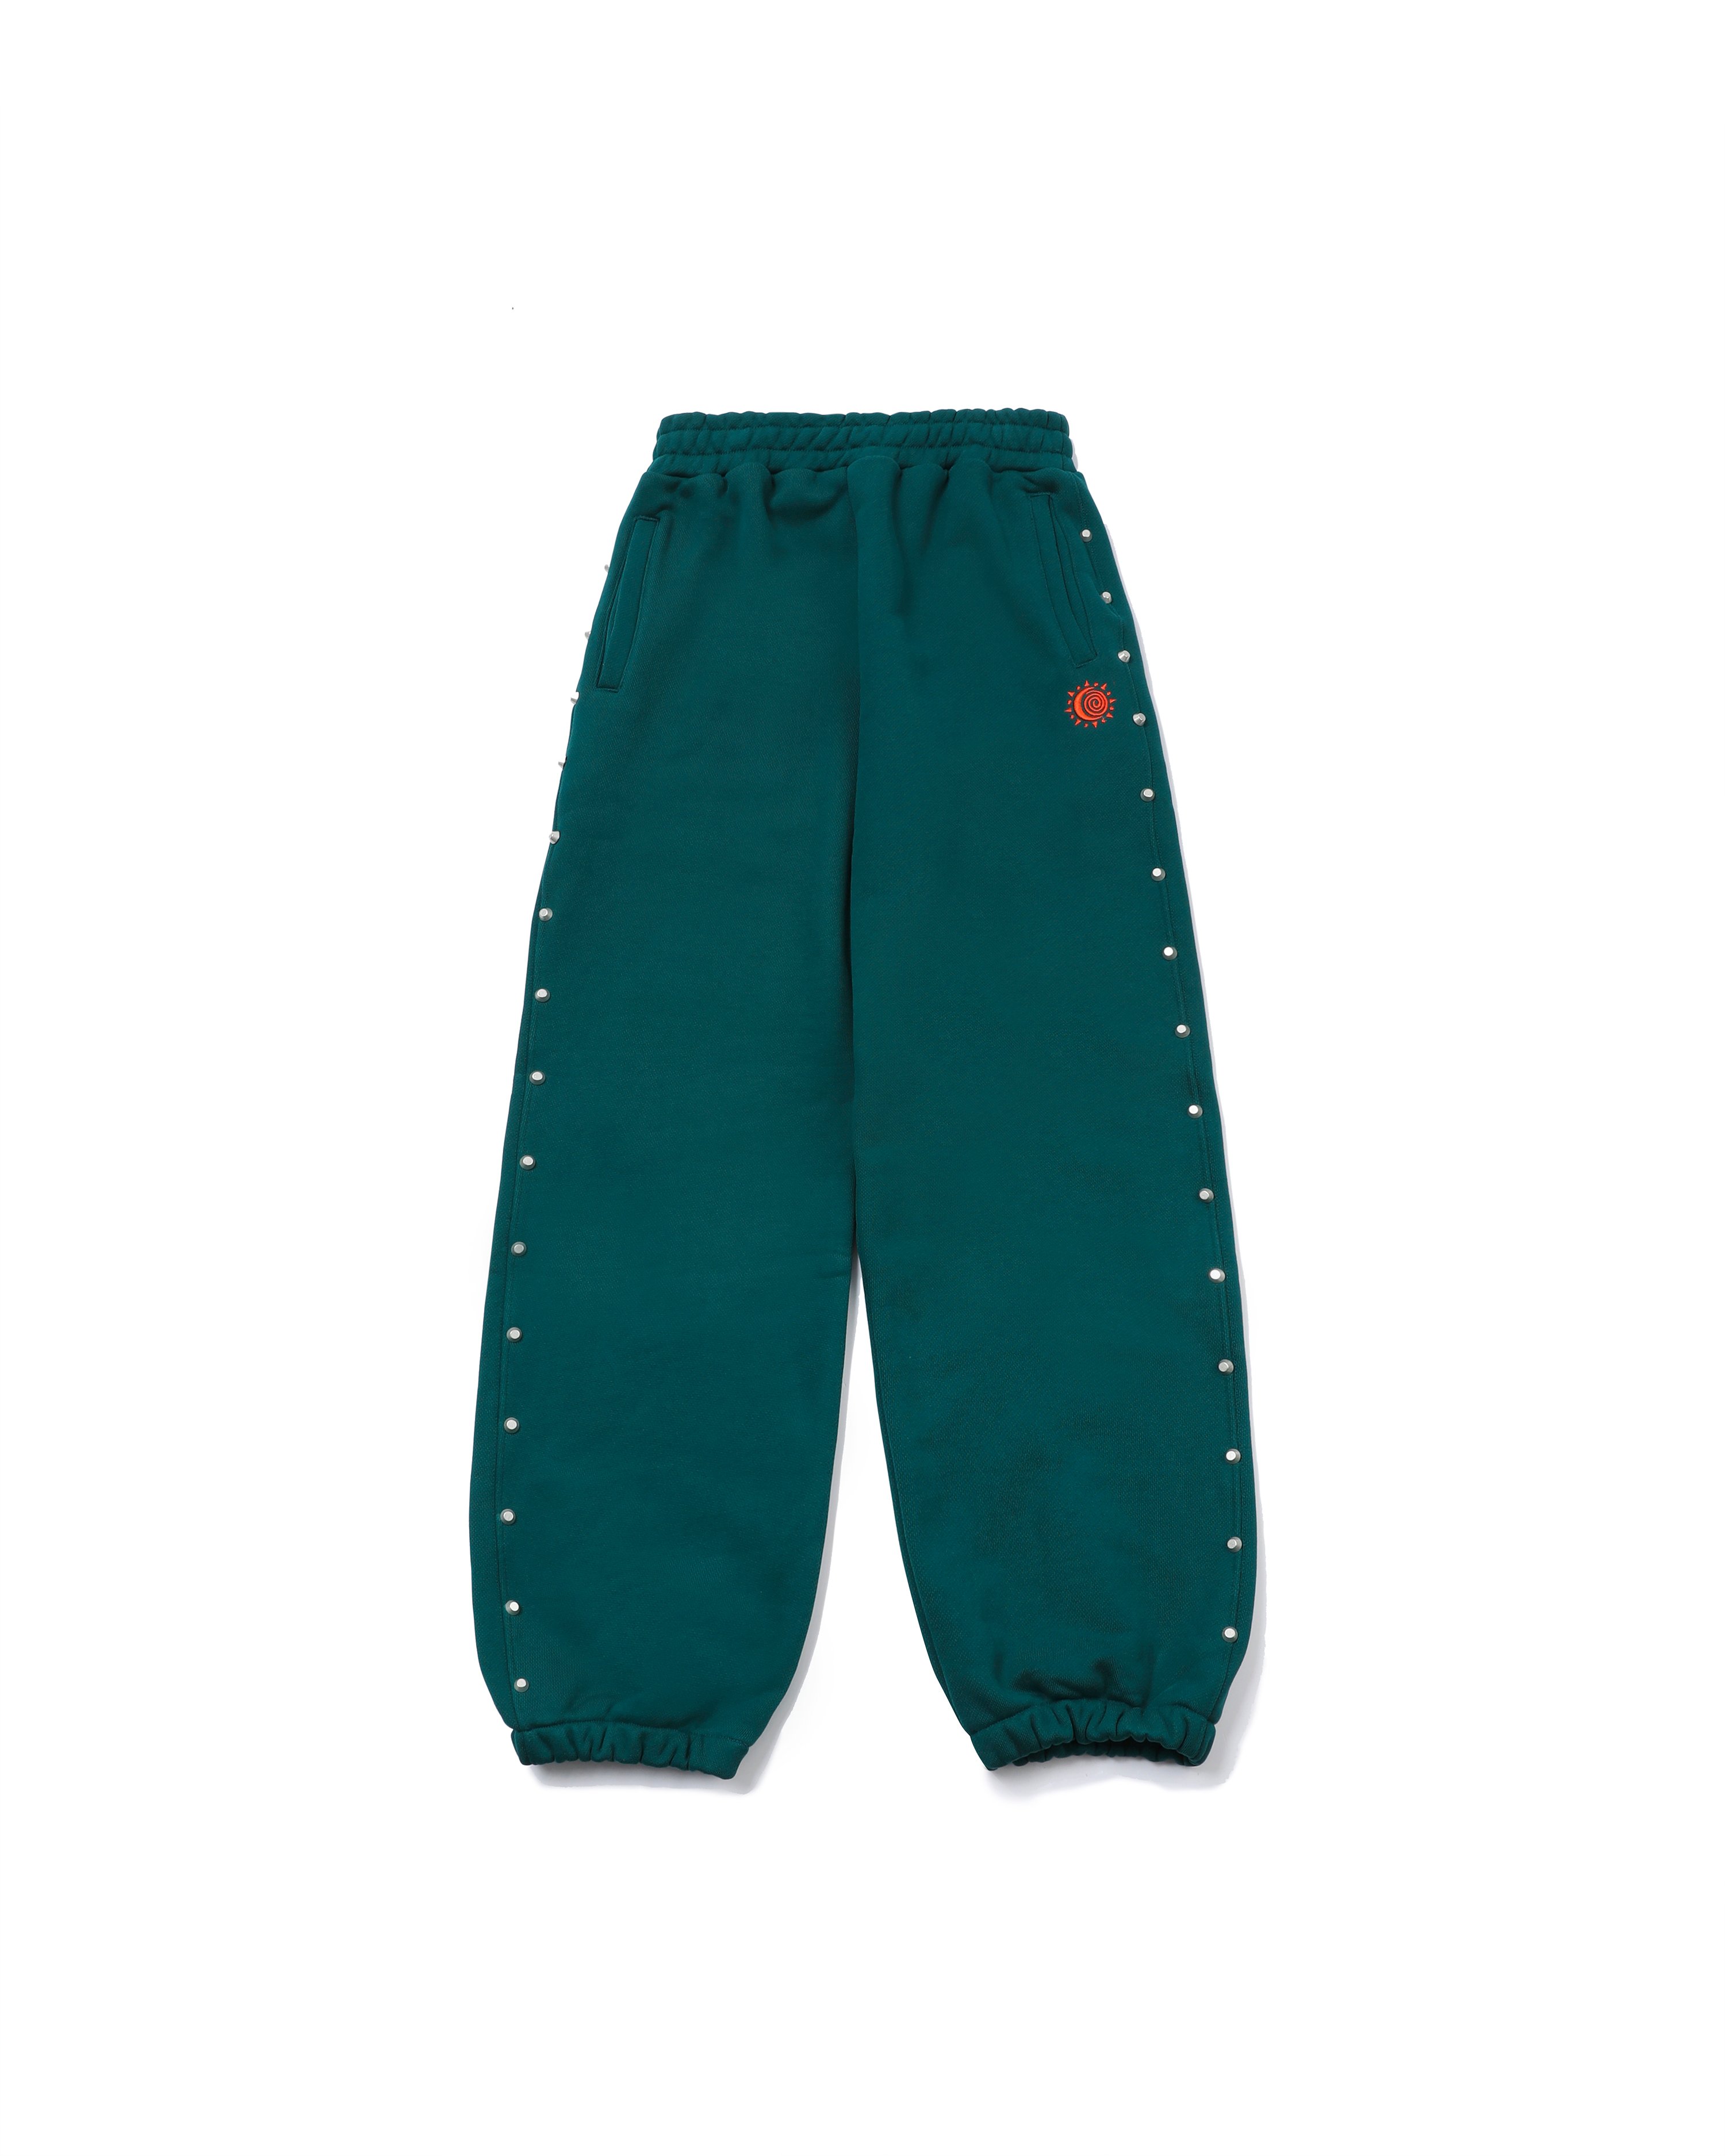 AZTEC SYMBOL EMBROIDERY STUDDED SWEAT PANTS(GREEN)